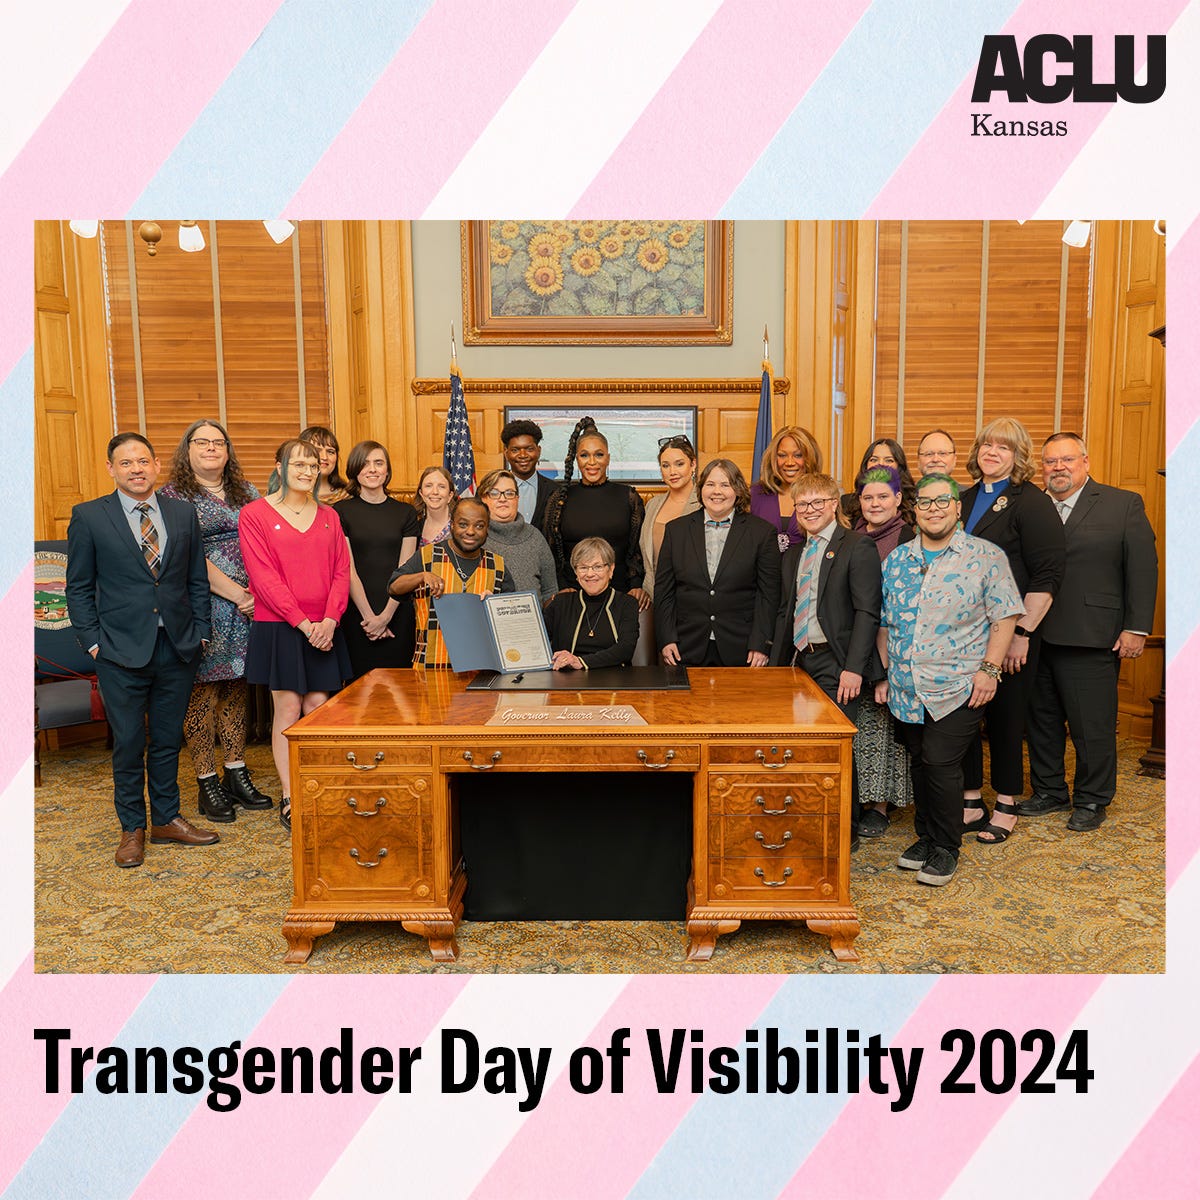 May be an image of 13 people and text that says 'ACLU Kansas Transgender Day of Visibility 2024'